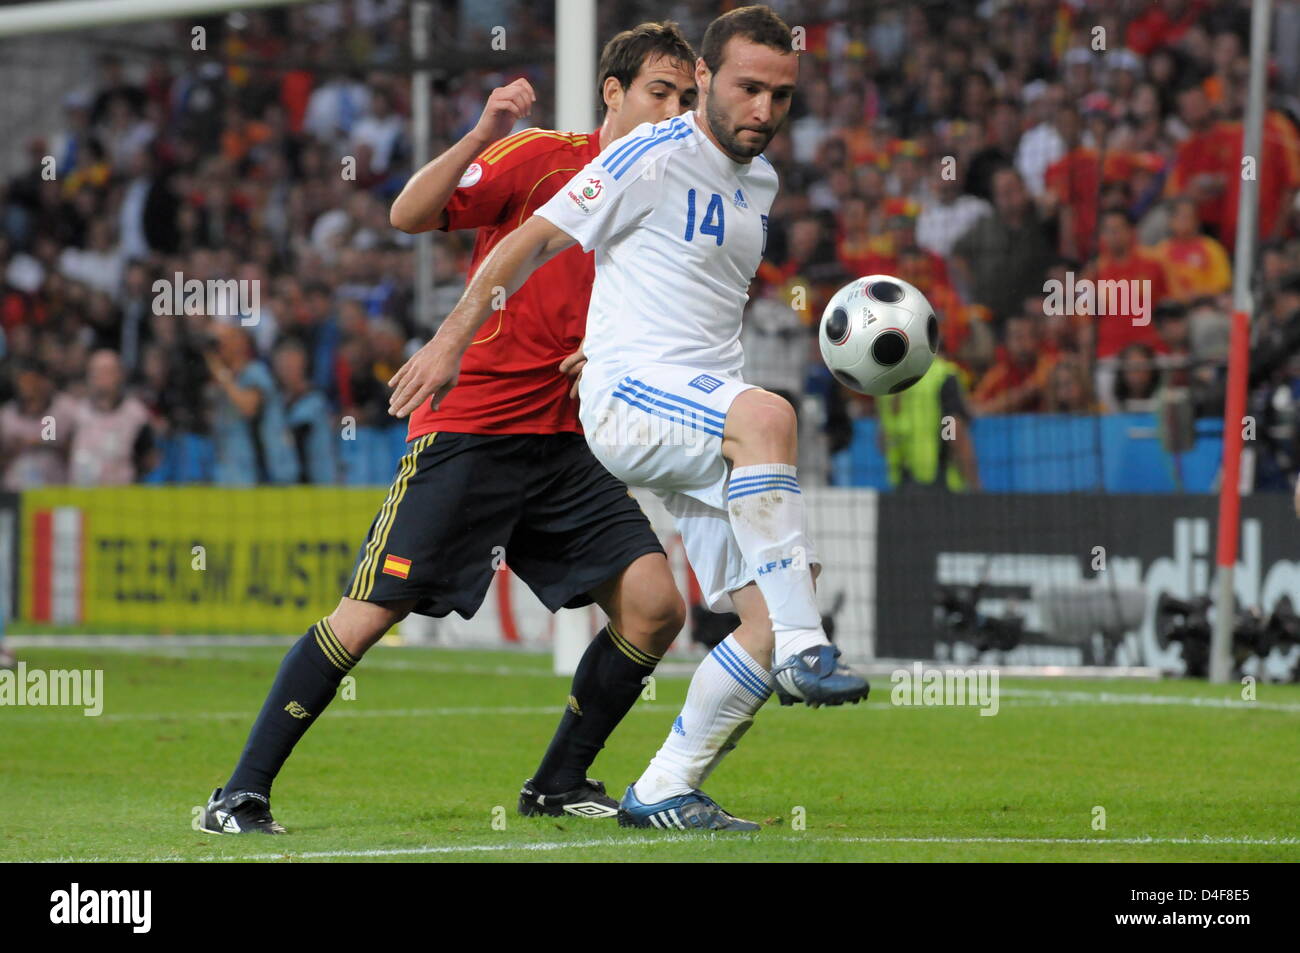 Dimitrios Salpingidis (R) of Greece vies with Fernando Navarro of Spain during the UEFA EURO 2008 Group D preliminary round match between Greece and Spain at the Walz-Siezenheim stadium in Salzburg, Austria, 18 June 2008. Photo: Achim Scheidemann dpa +please note UEFA restrictions particulary in regard to slide shows and 'No Mobile Services'+ +++(c) dpa - Bildfunk+++ Stock Photo